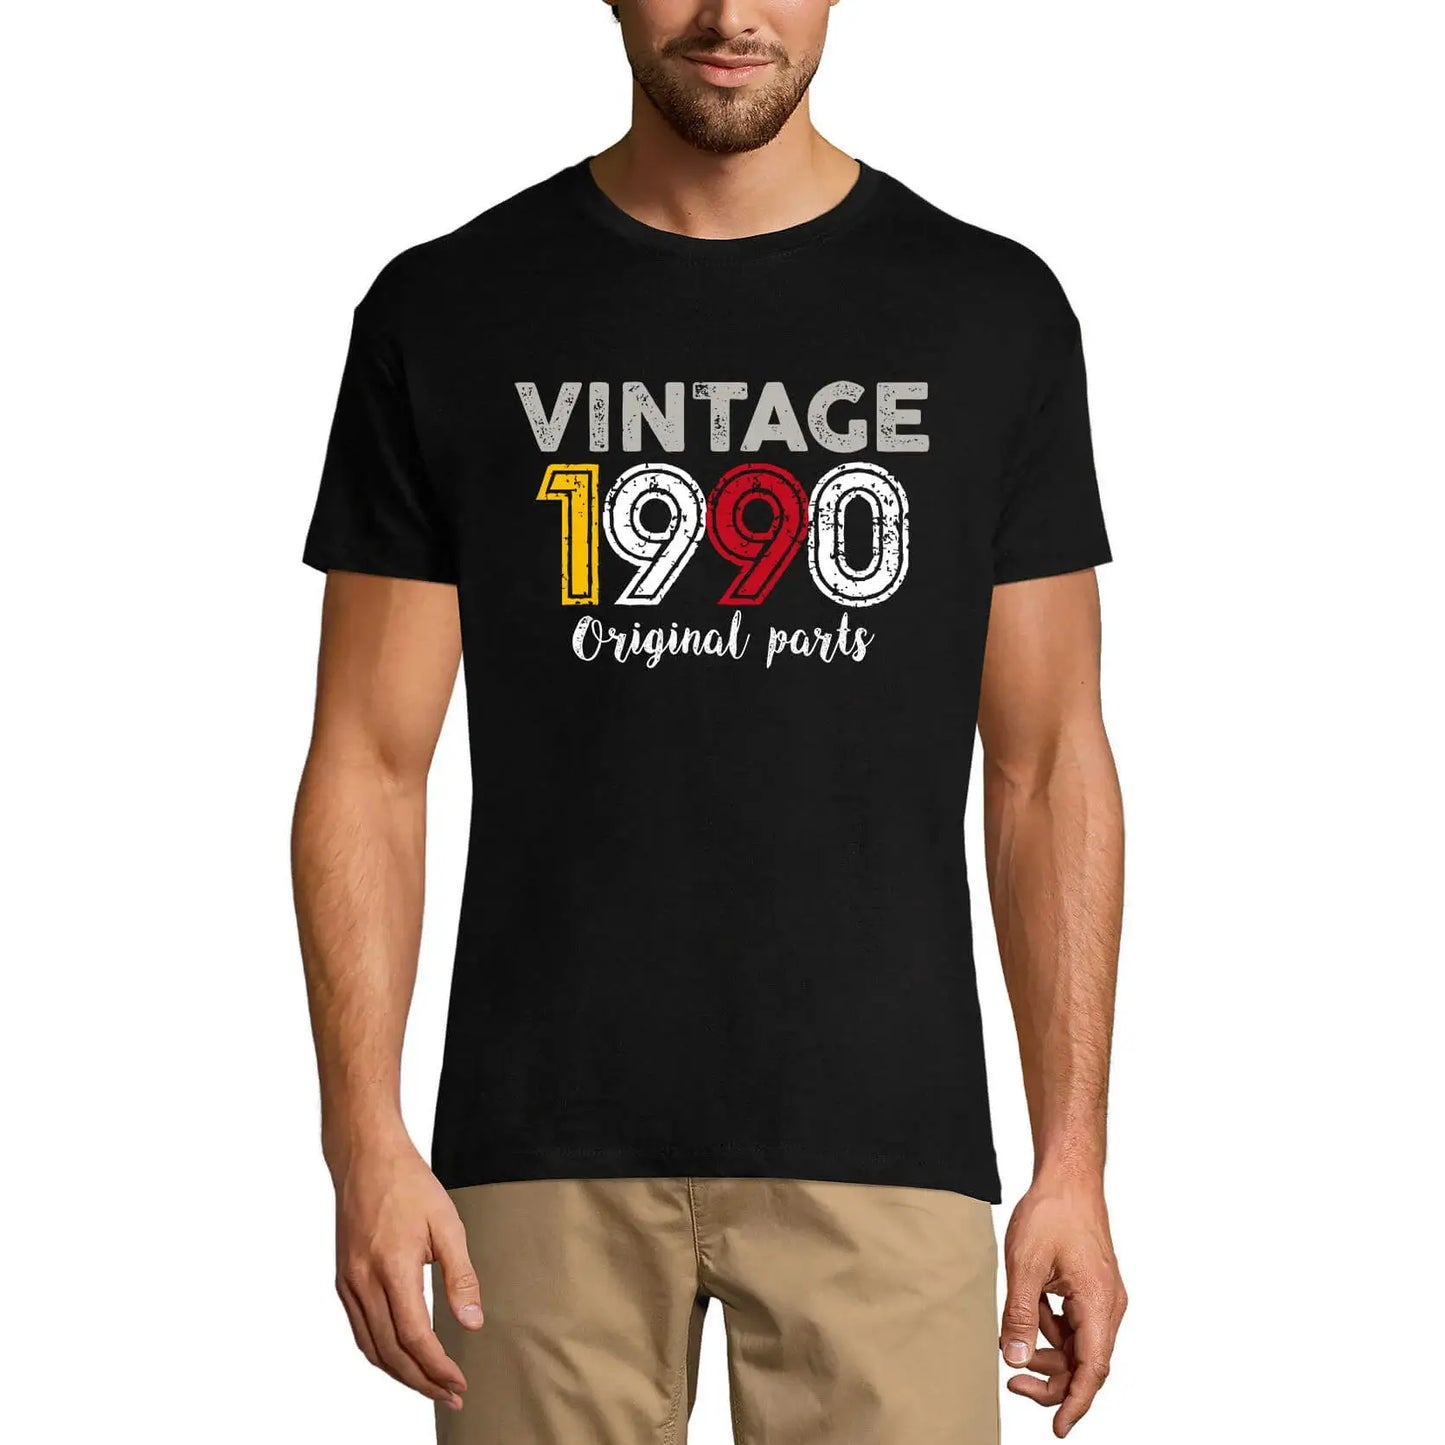 Men's Graphic T-Shirt Original Parts 1990 34th Birthday Anniversary 34 Year Old Gift 1990 Vintage Eco-Friendly Short Sleeve Novelty Tee